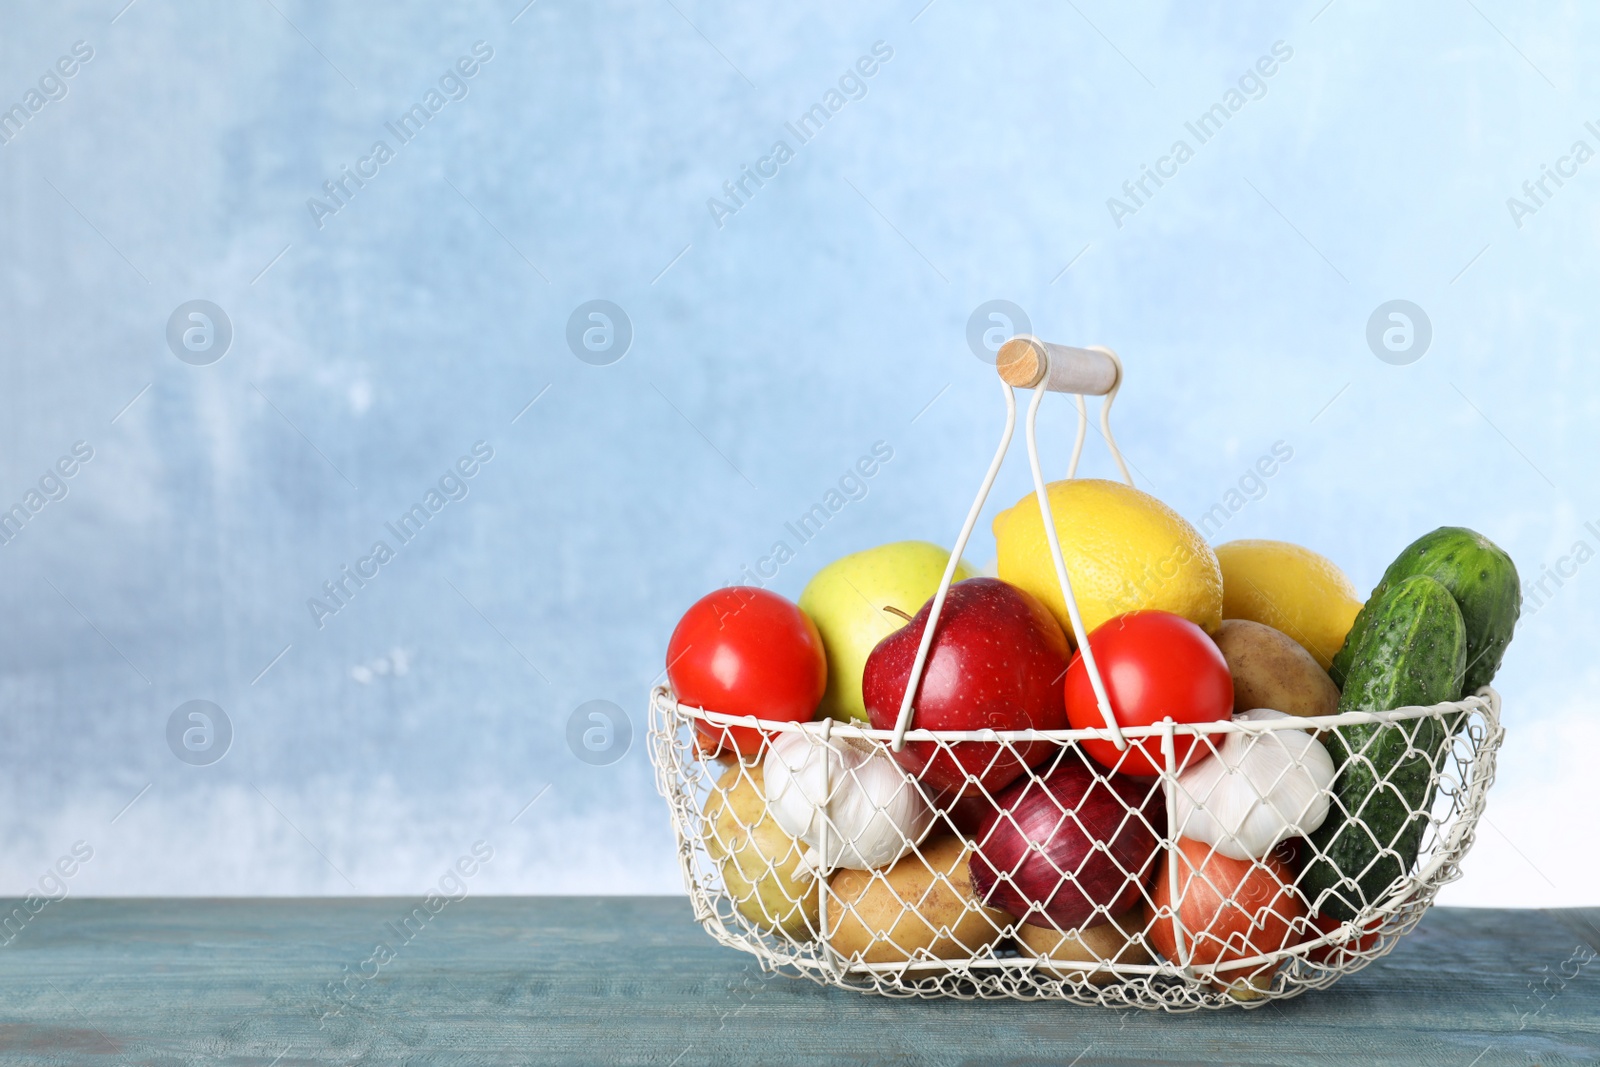 Photo of Basket full of fresh vegetables and fruits on table against color background, space for text